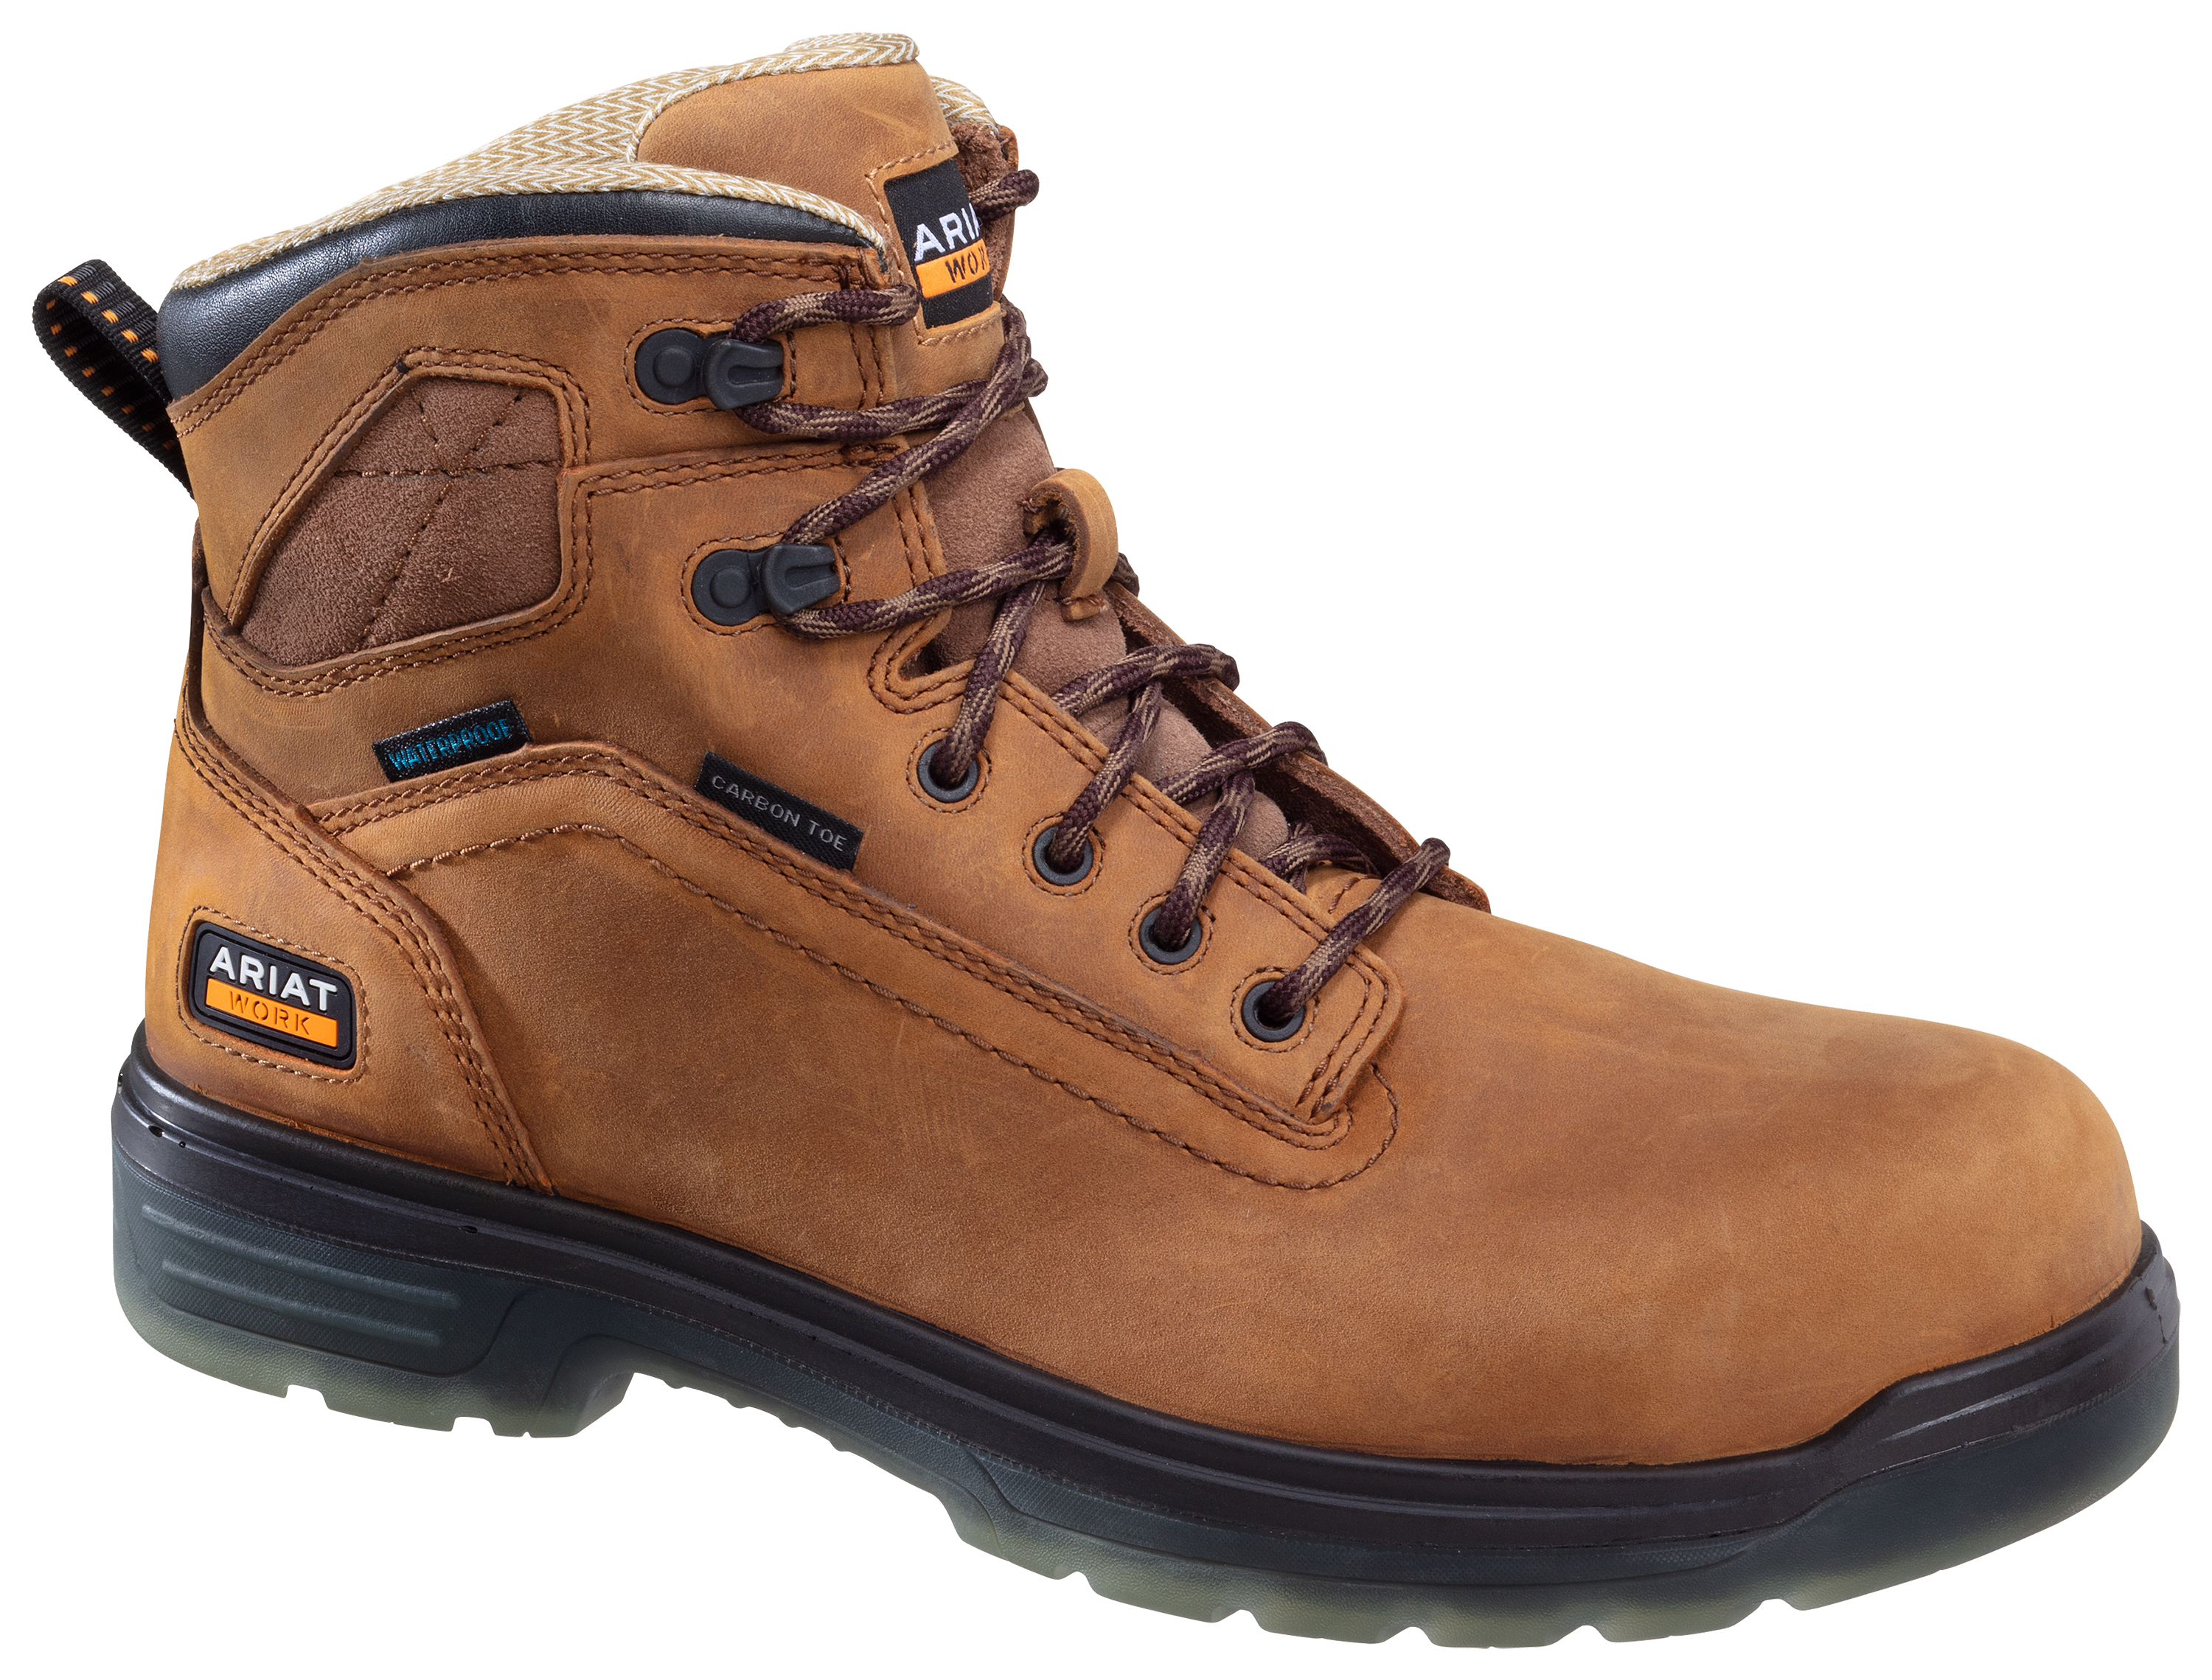 Ariat Turbo H20 Waterproof Carbon Toe Work Boots for Men | Bass Pro Shops